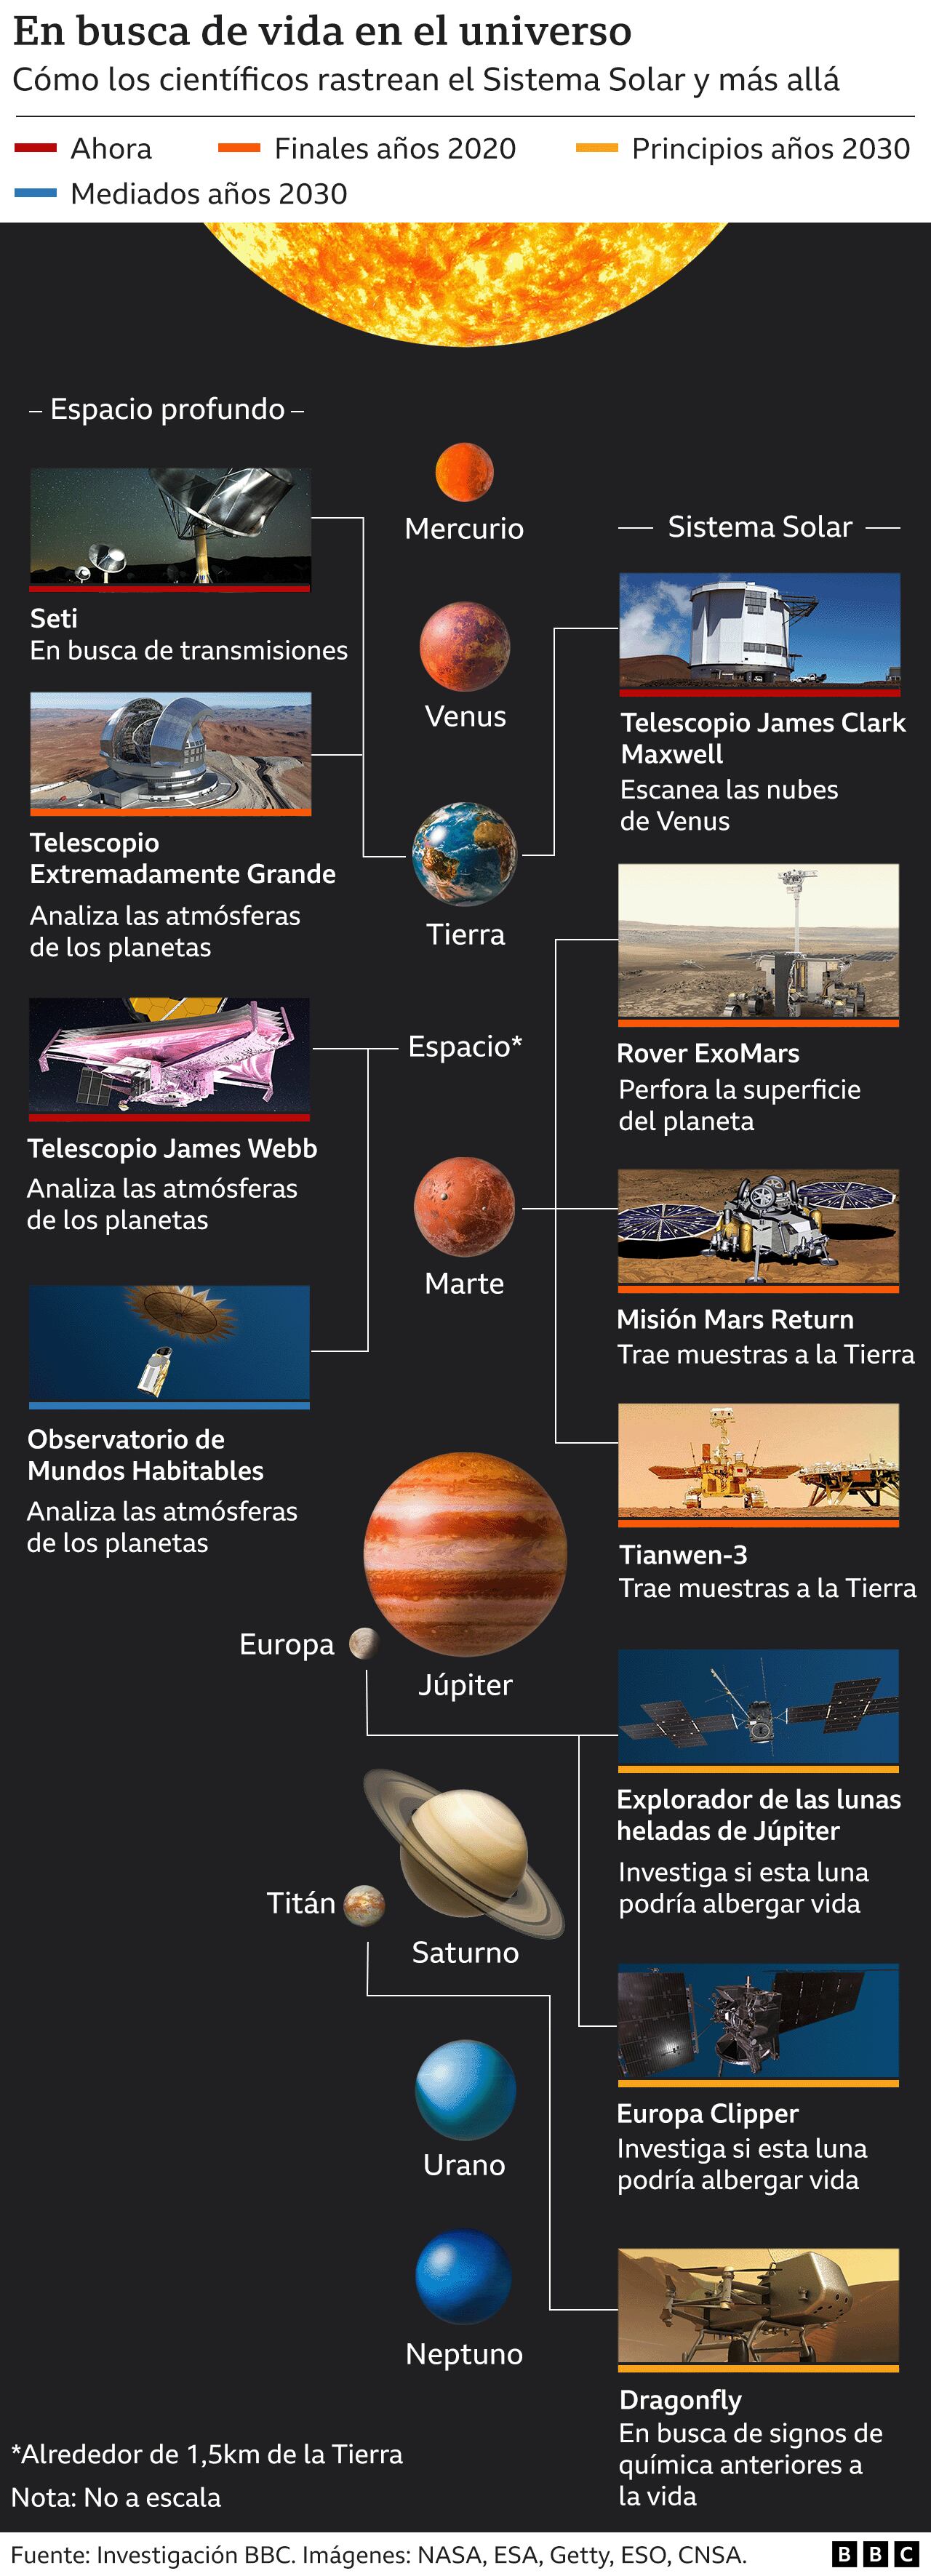 Graphic showing different projects in search of life in space.